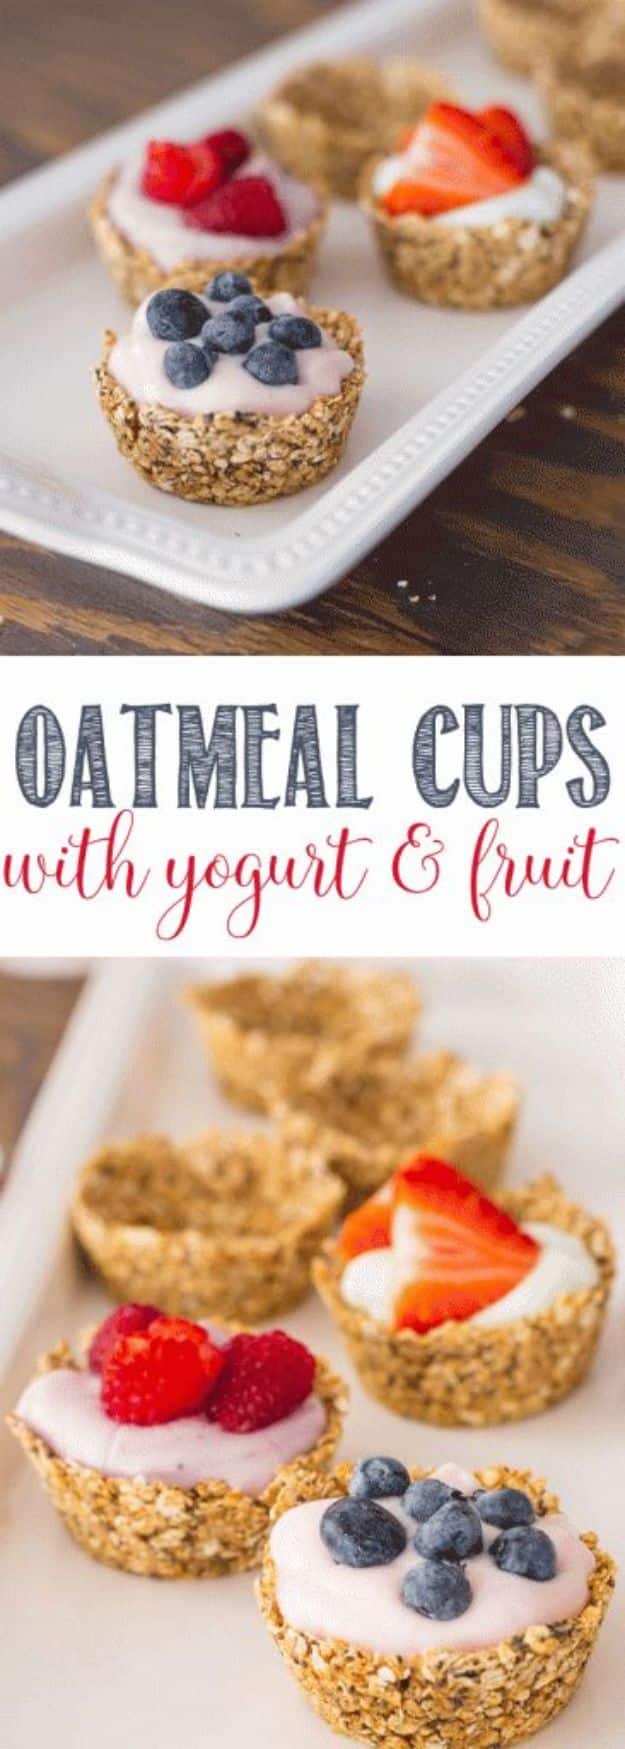 Best Brunch Recipes - Oatmeal Cups with Yogurt and Fruit - Eggs, Pancakes, Waffles, Casseroles, Vegetable Dishes and Side, Potato Recipe Ideas for Brunches - Serve A Crowd and Family with the versions of Eggs Benedict, Mimosas, Muffins and Pastries, Desserts - Make Ahead , Slow Cooler and Healthy Casserole Recipes #brunch #breakfast #recipes